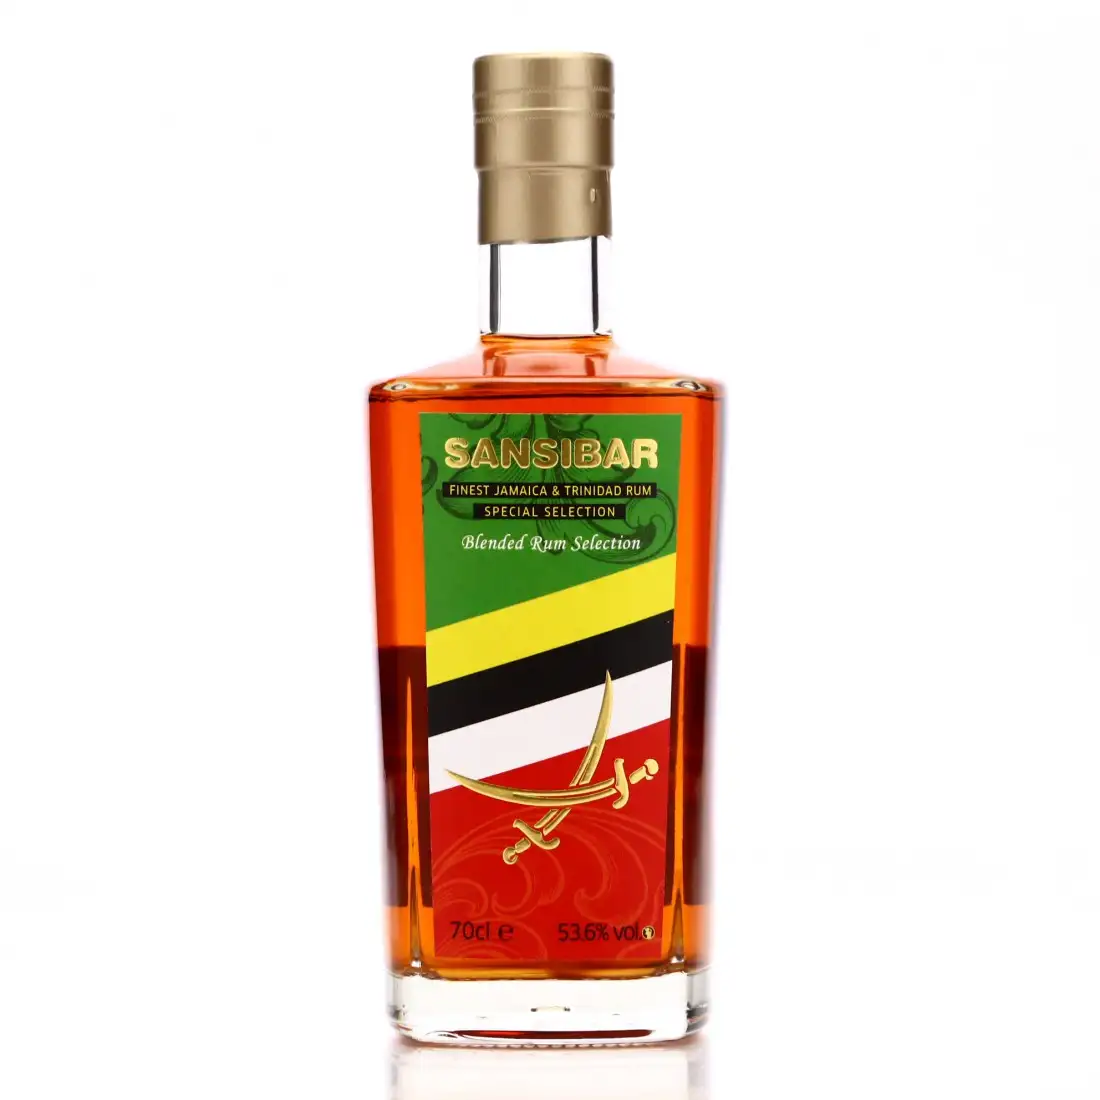 Image of the front of the bottle of the rum Finest Jamaica & Trinidad Rum Special Selection